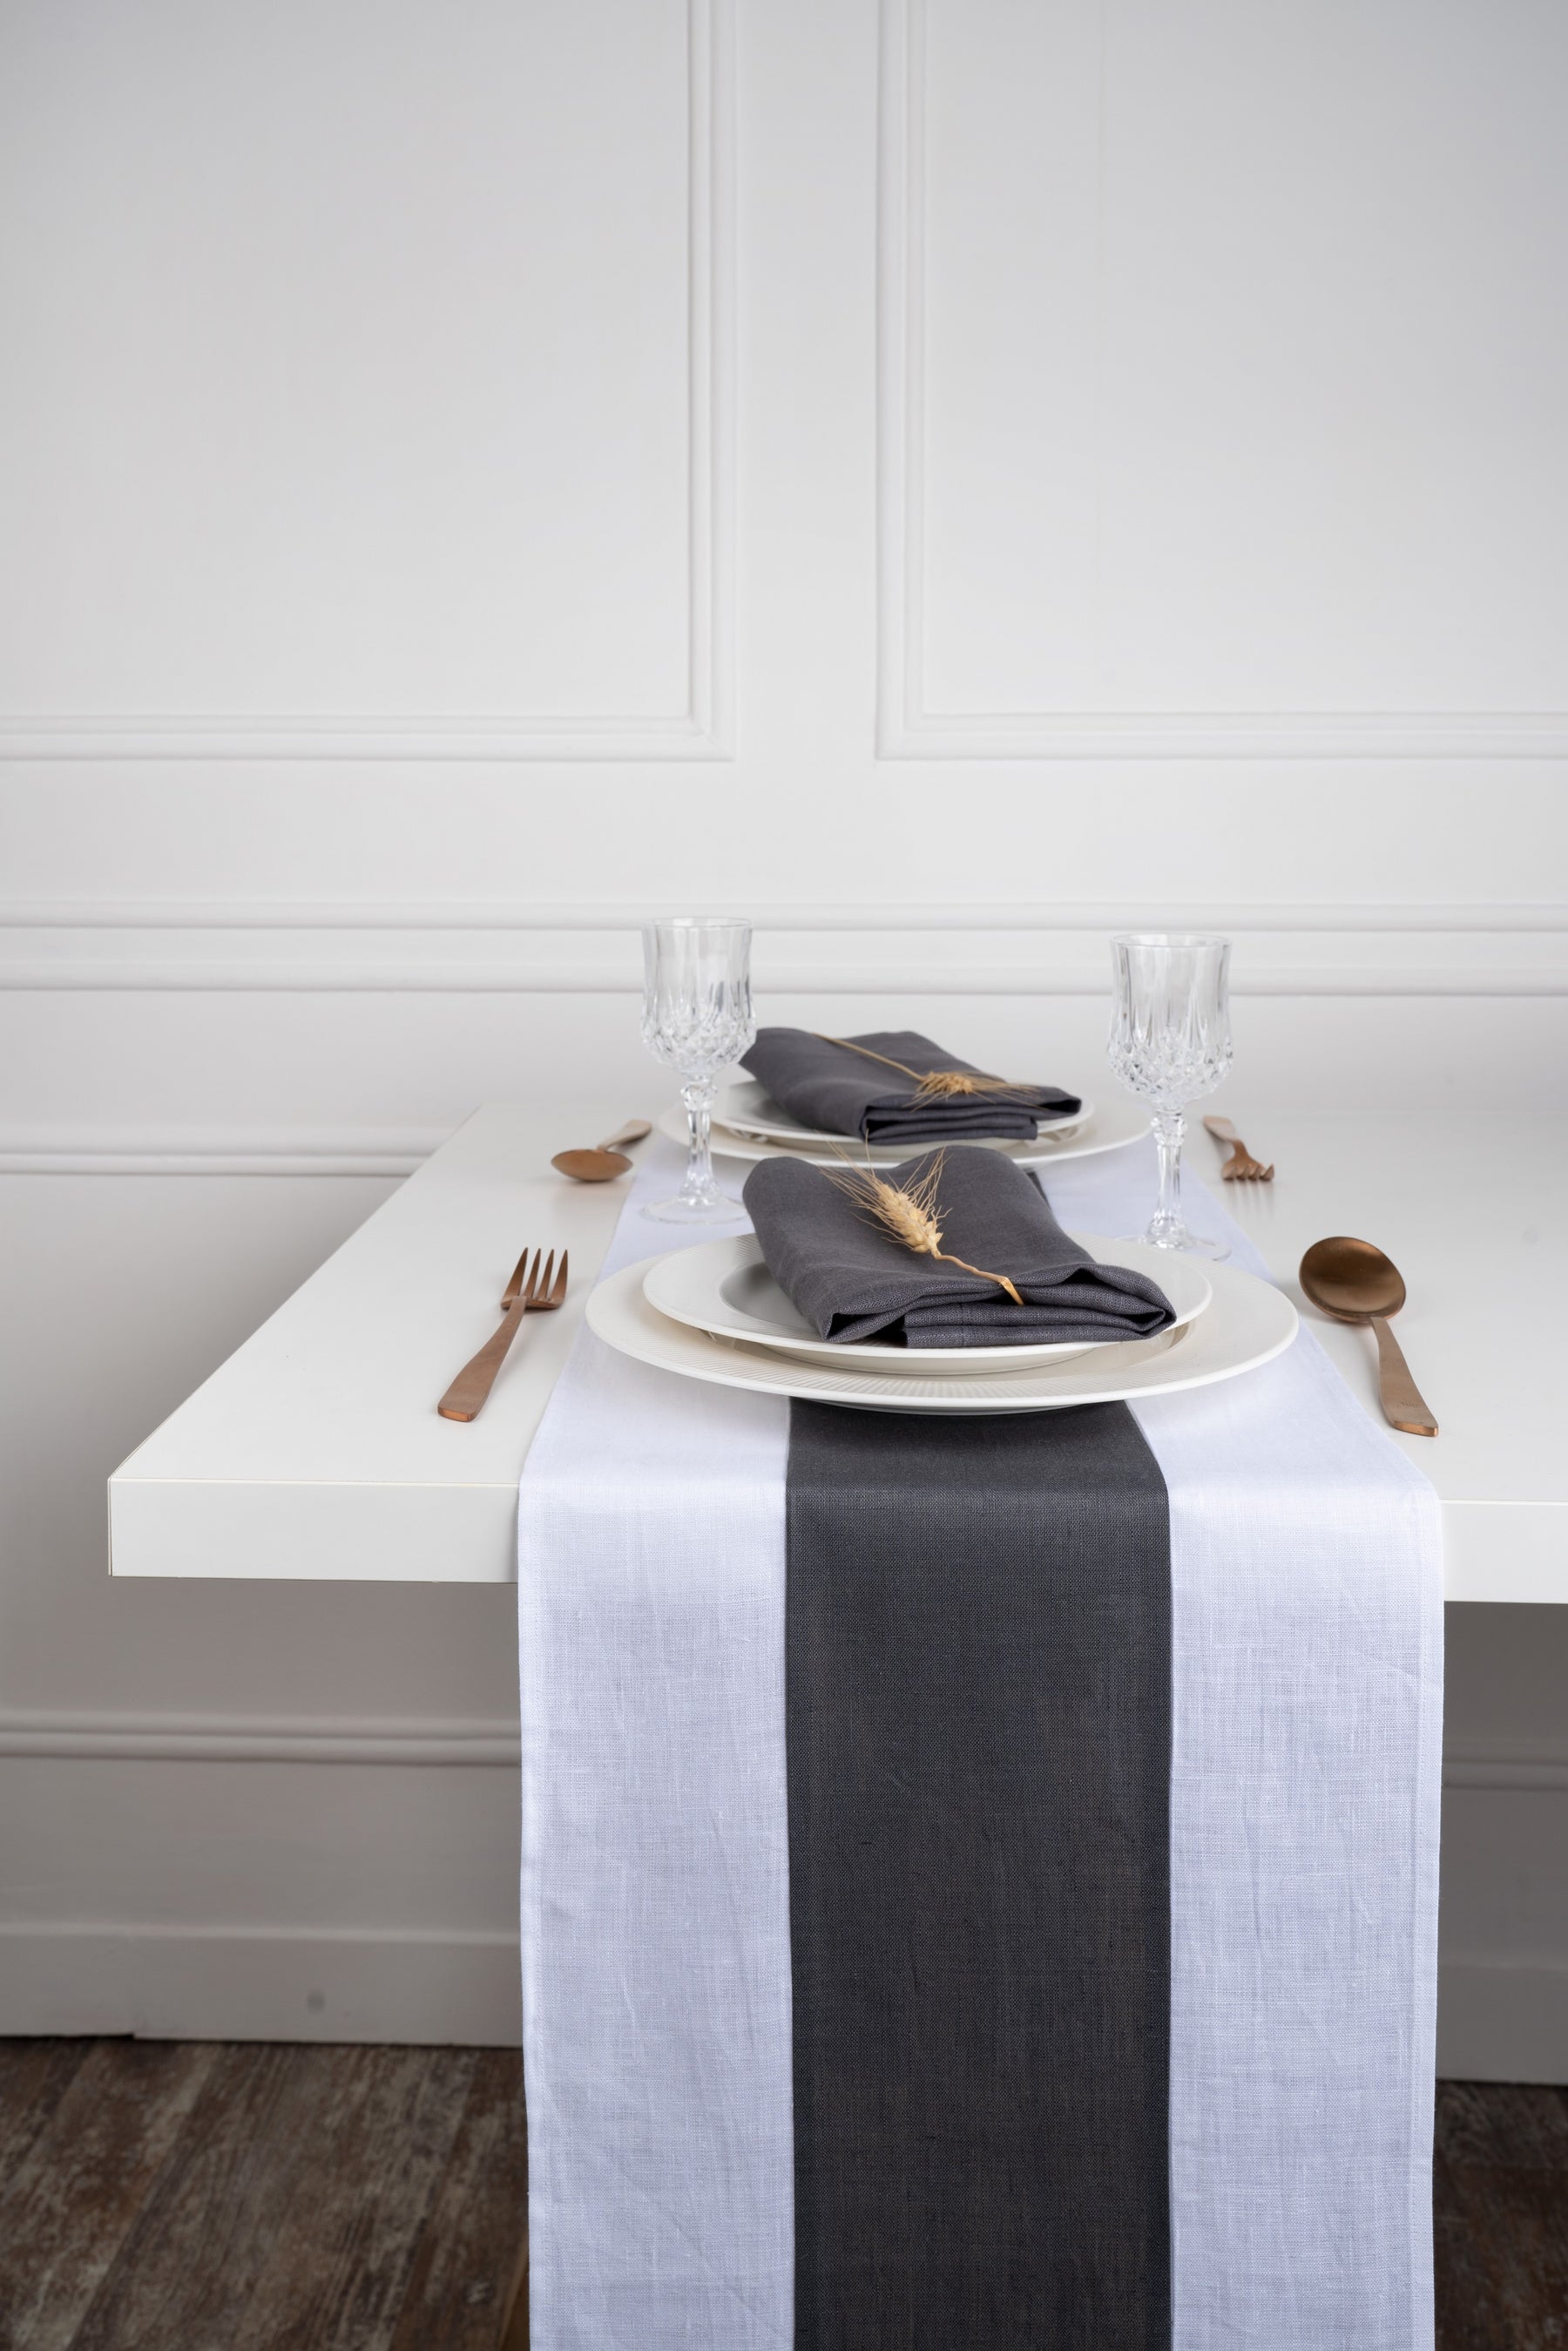 Splicing Linen Table Runner - White and Charcoal grey